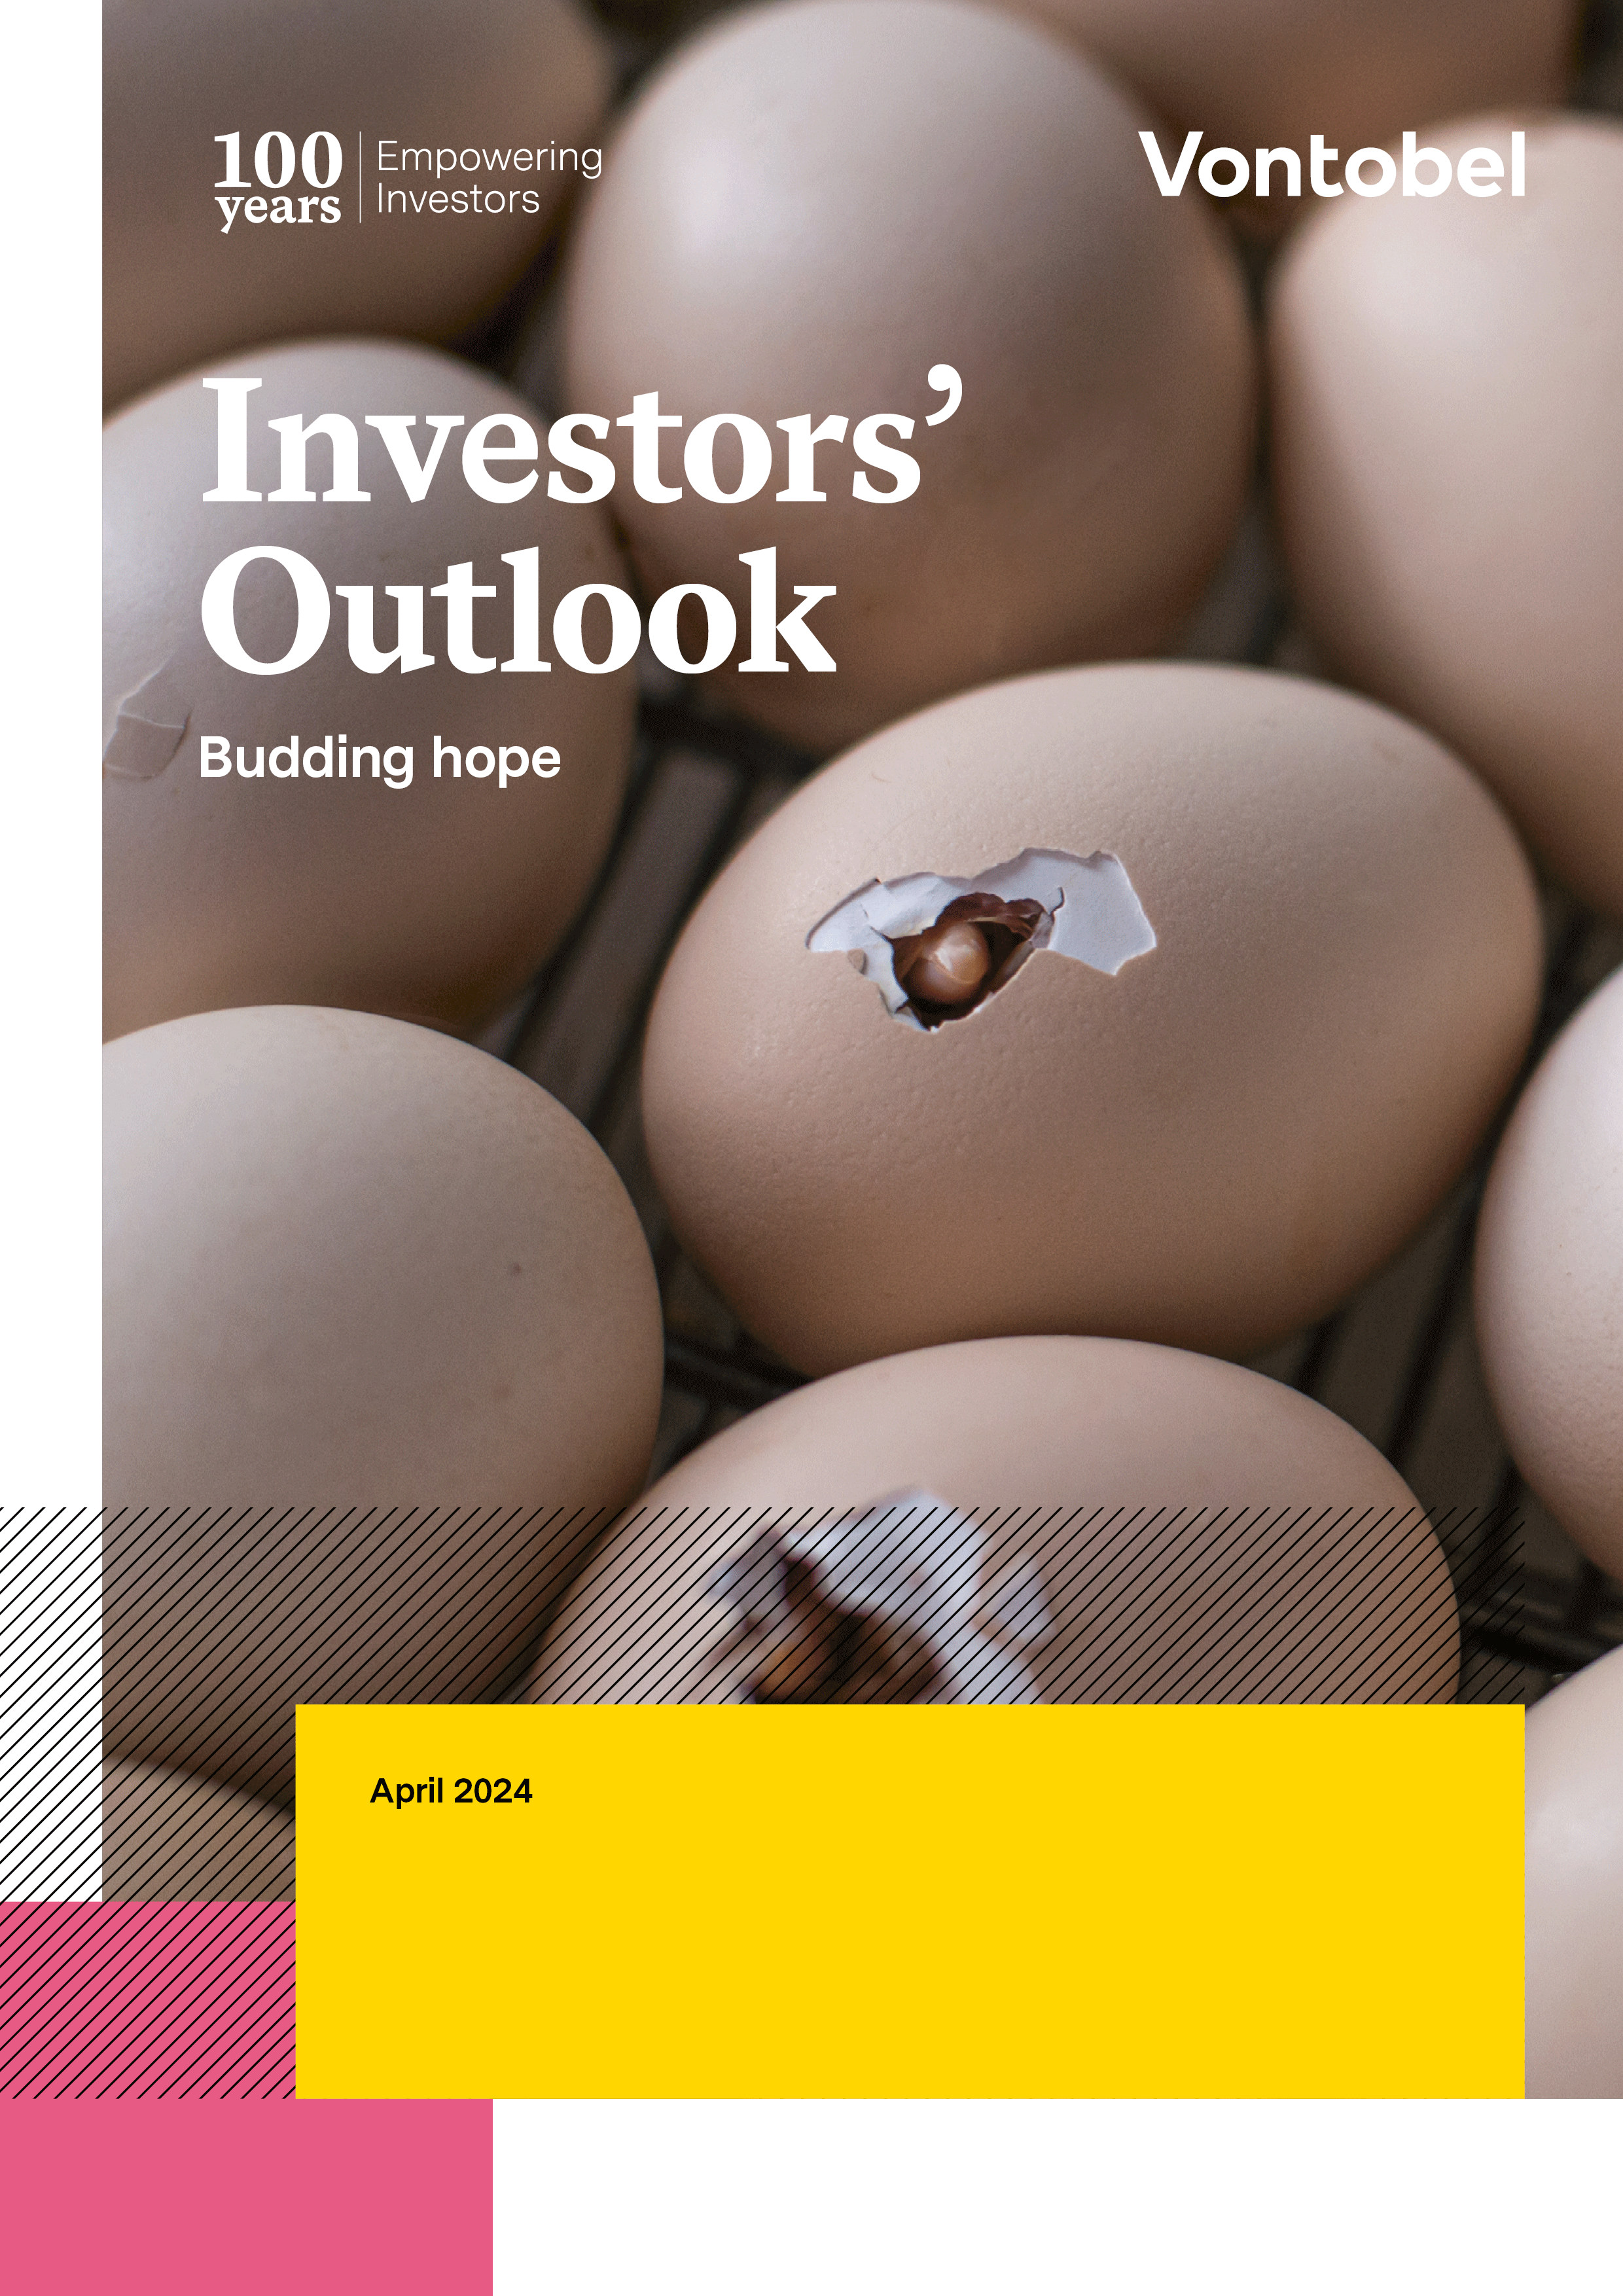 Investor's Outlook April from Vontobel - Cover PDF with eggs from which chicks hatch